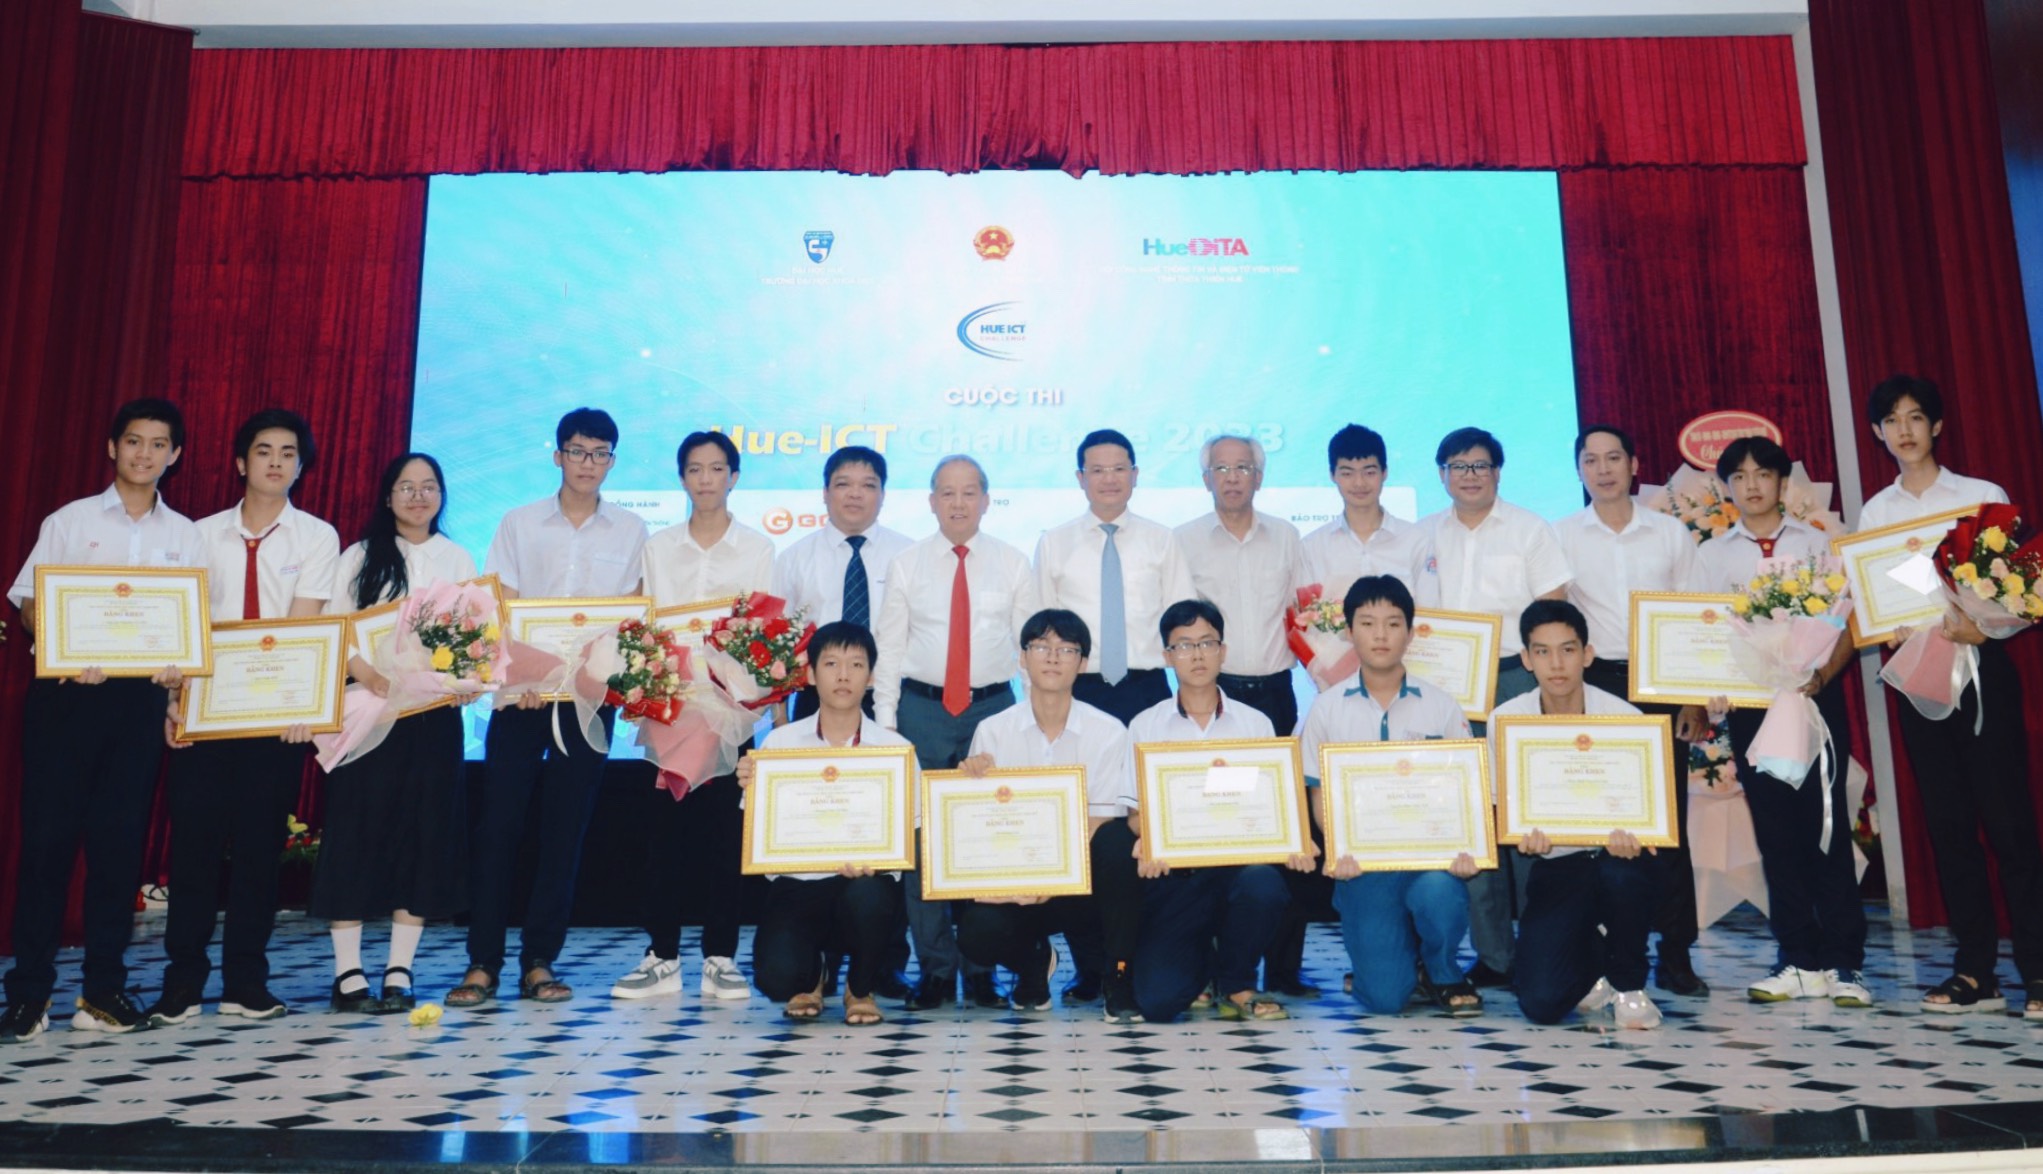 The representative of the provincial leadership took a photo with the Contest Organizing Committee and the contestants received a certificate of merit from the Chairman of Thua Thien Hue Provincial People's Committee.